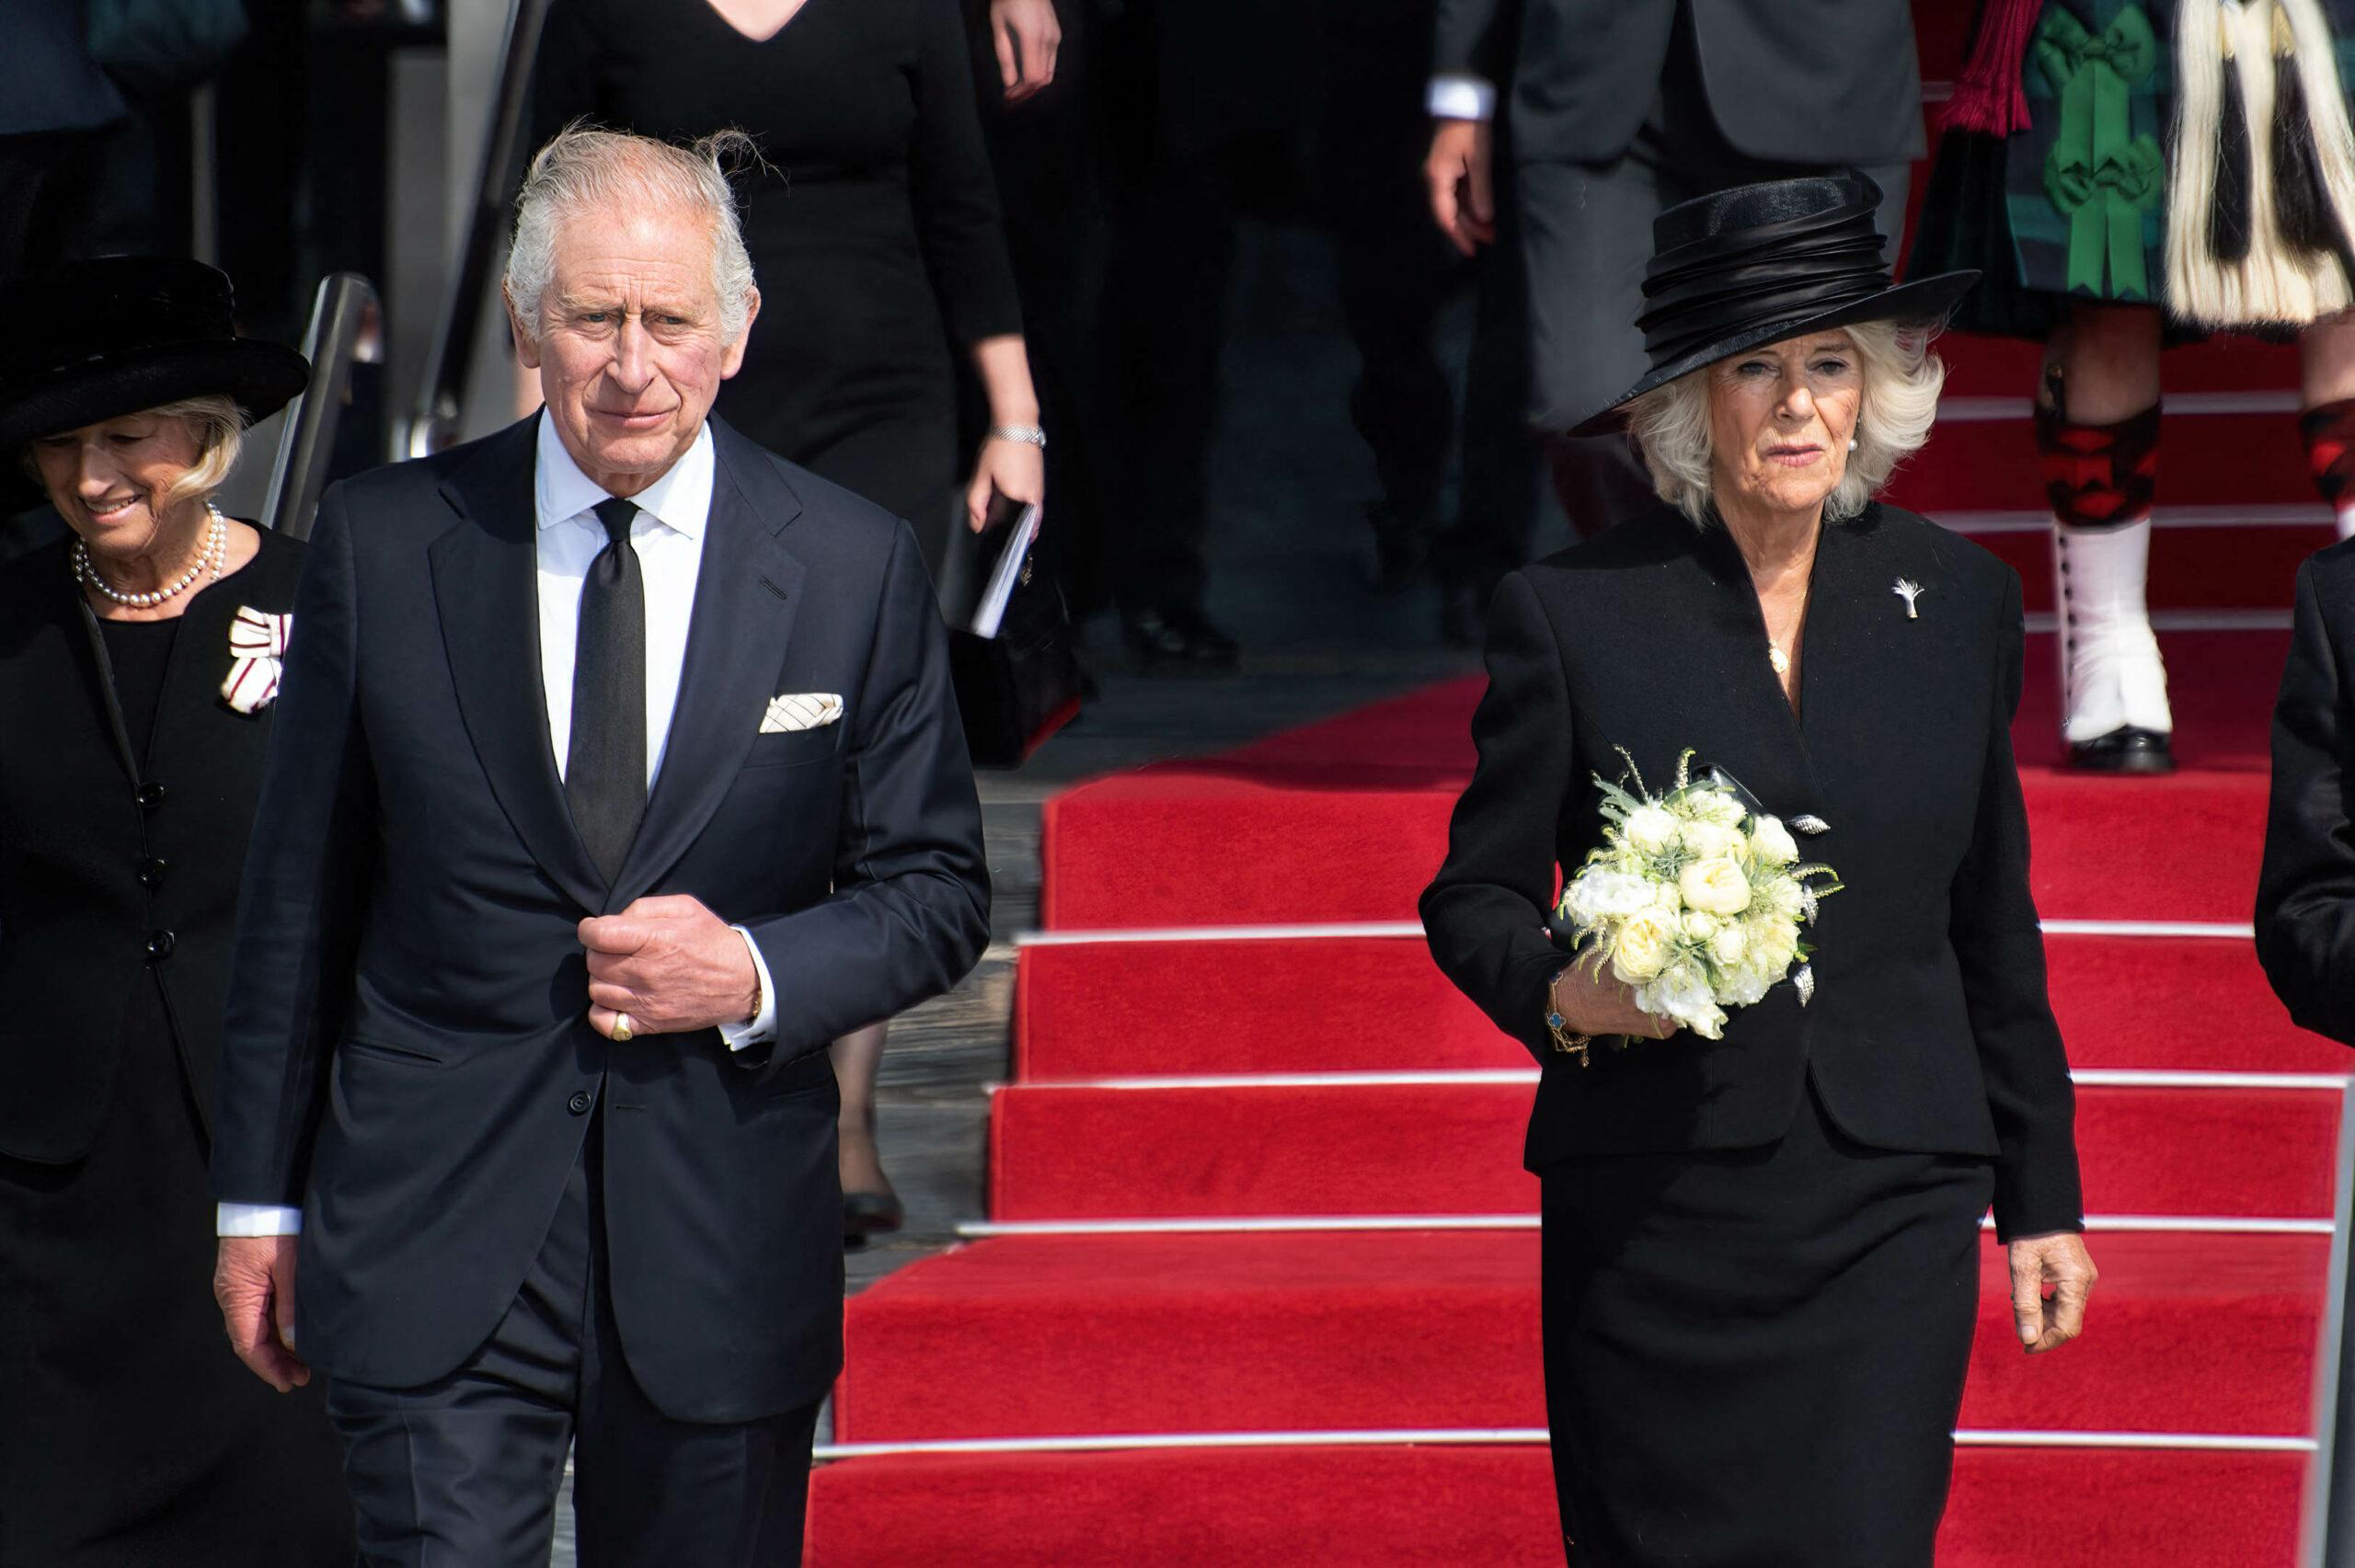 King Charles III and Queen Consort Camilla on their first official visit as the new leader of the United Kingdom